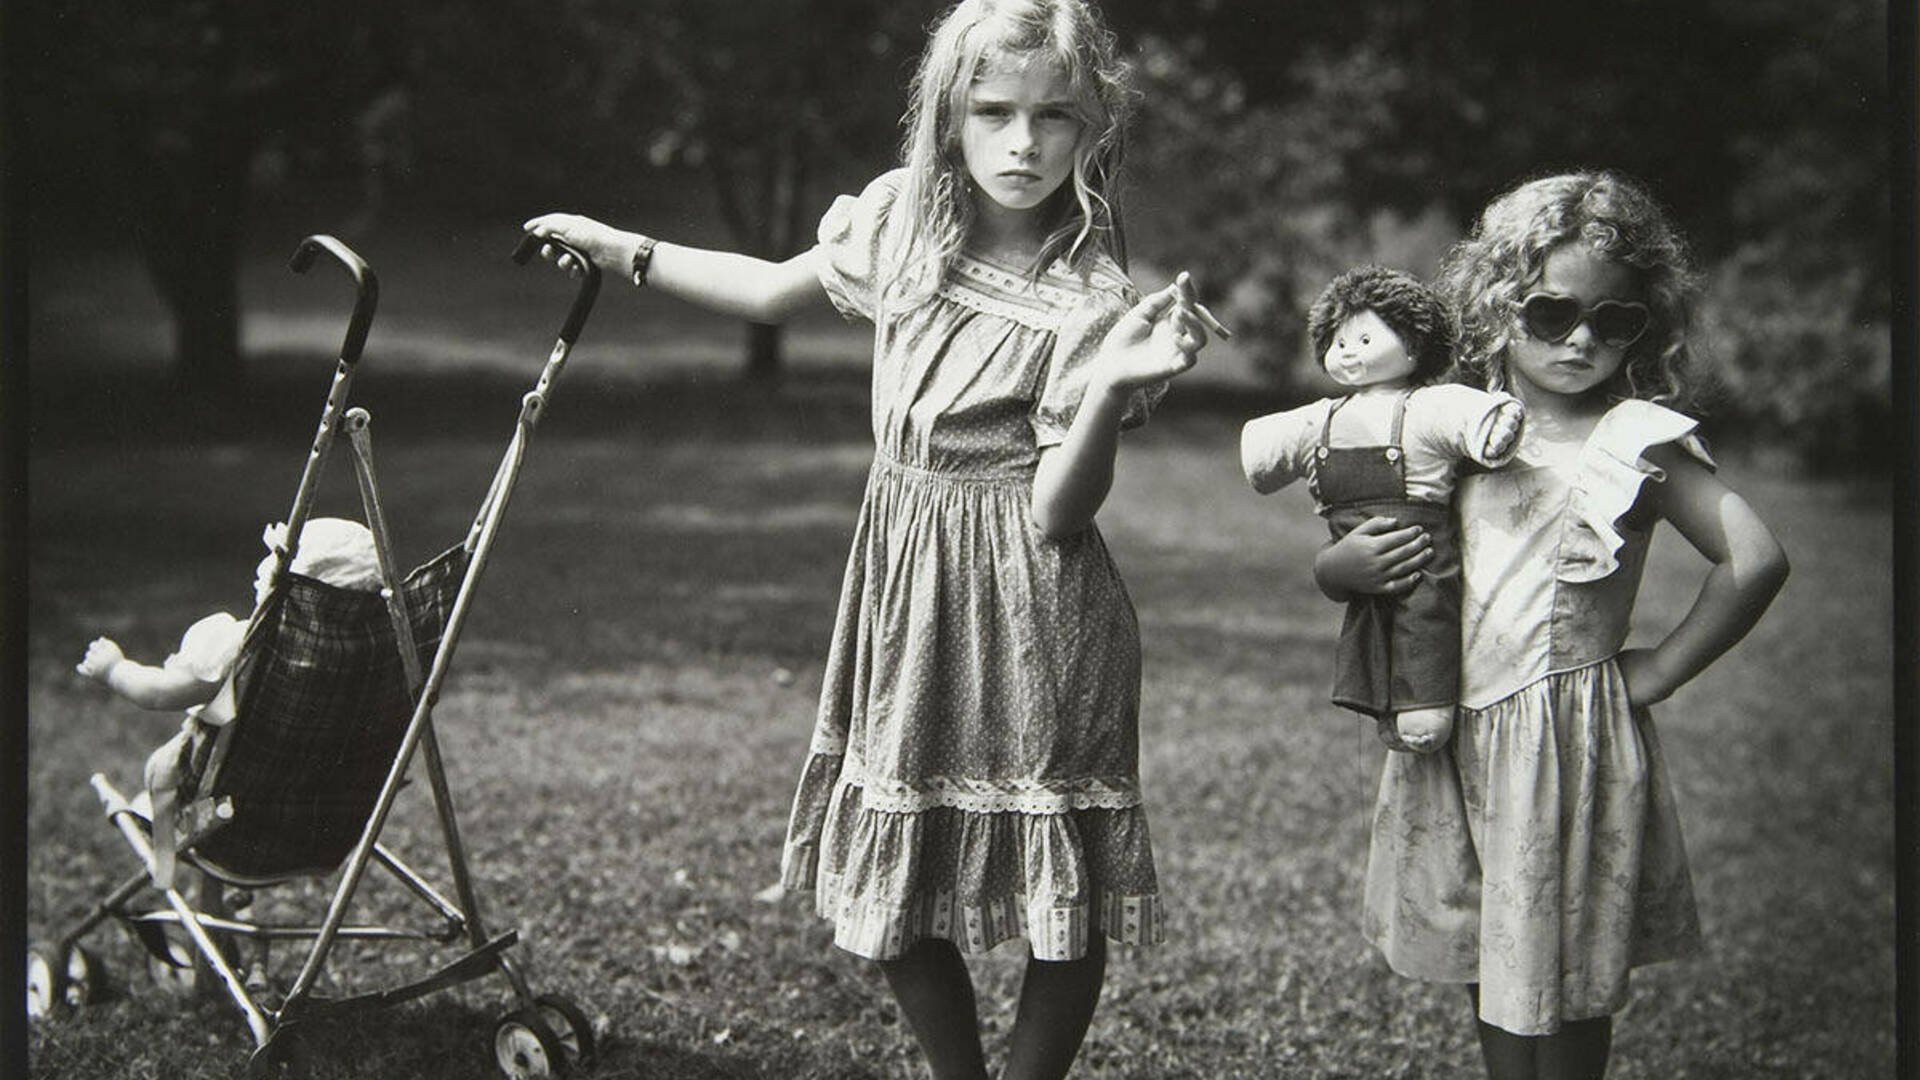 Sally Mann (American, b. 1951), New Mothers, 1989, gelatin silver print. Gift of Bill, ND '65 and Ann Marie McGraw, 2009.047.008